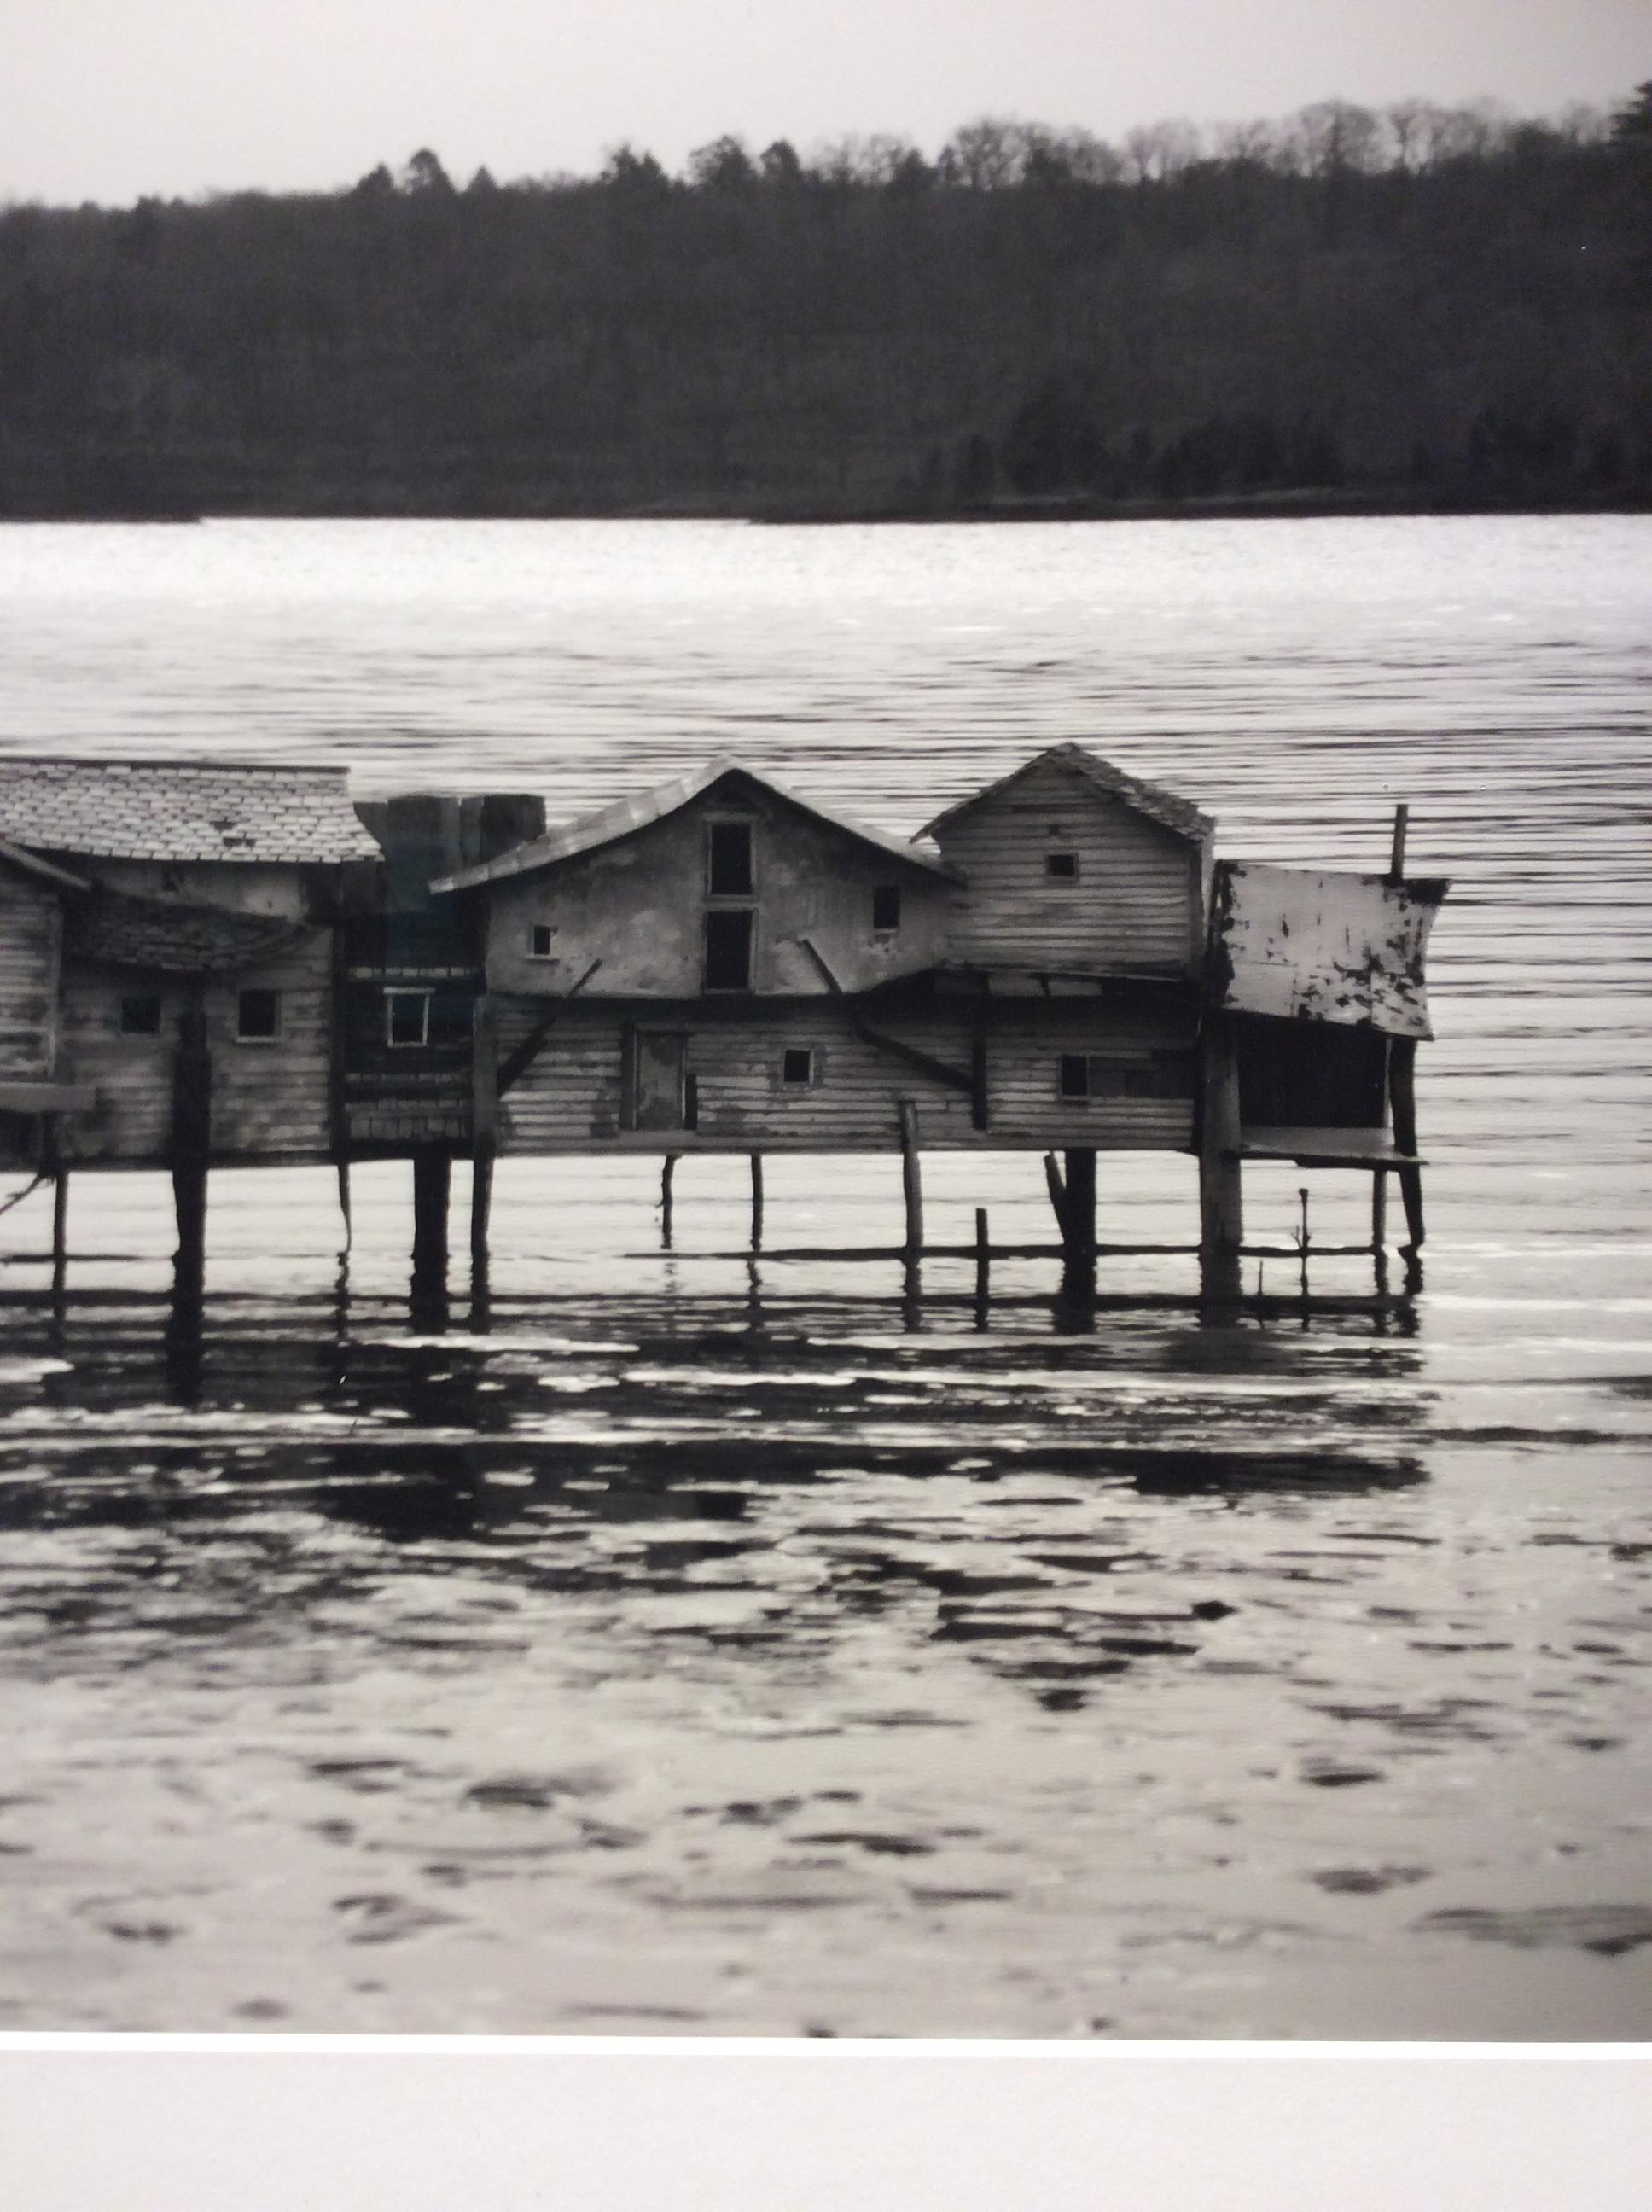 Mudflat House (Black & White Landscape Photograph of a House in Water) - Gray Black and White Photograph by Robert Hite